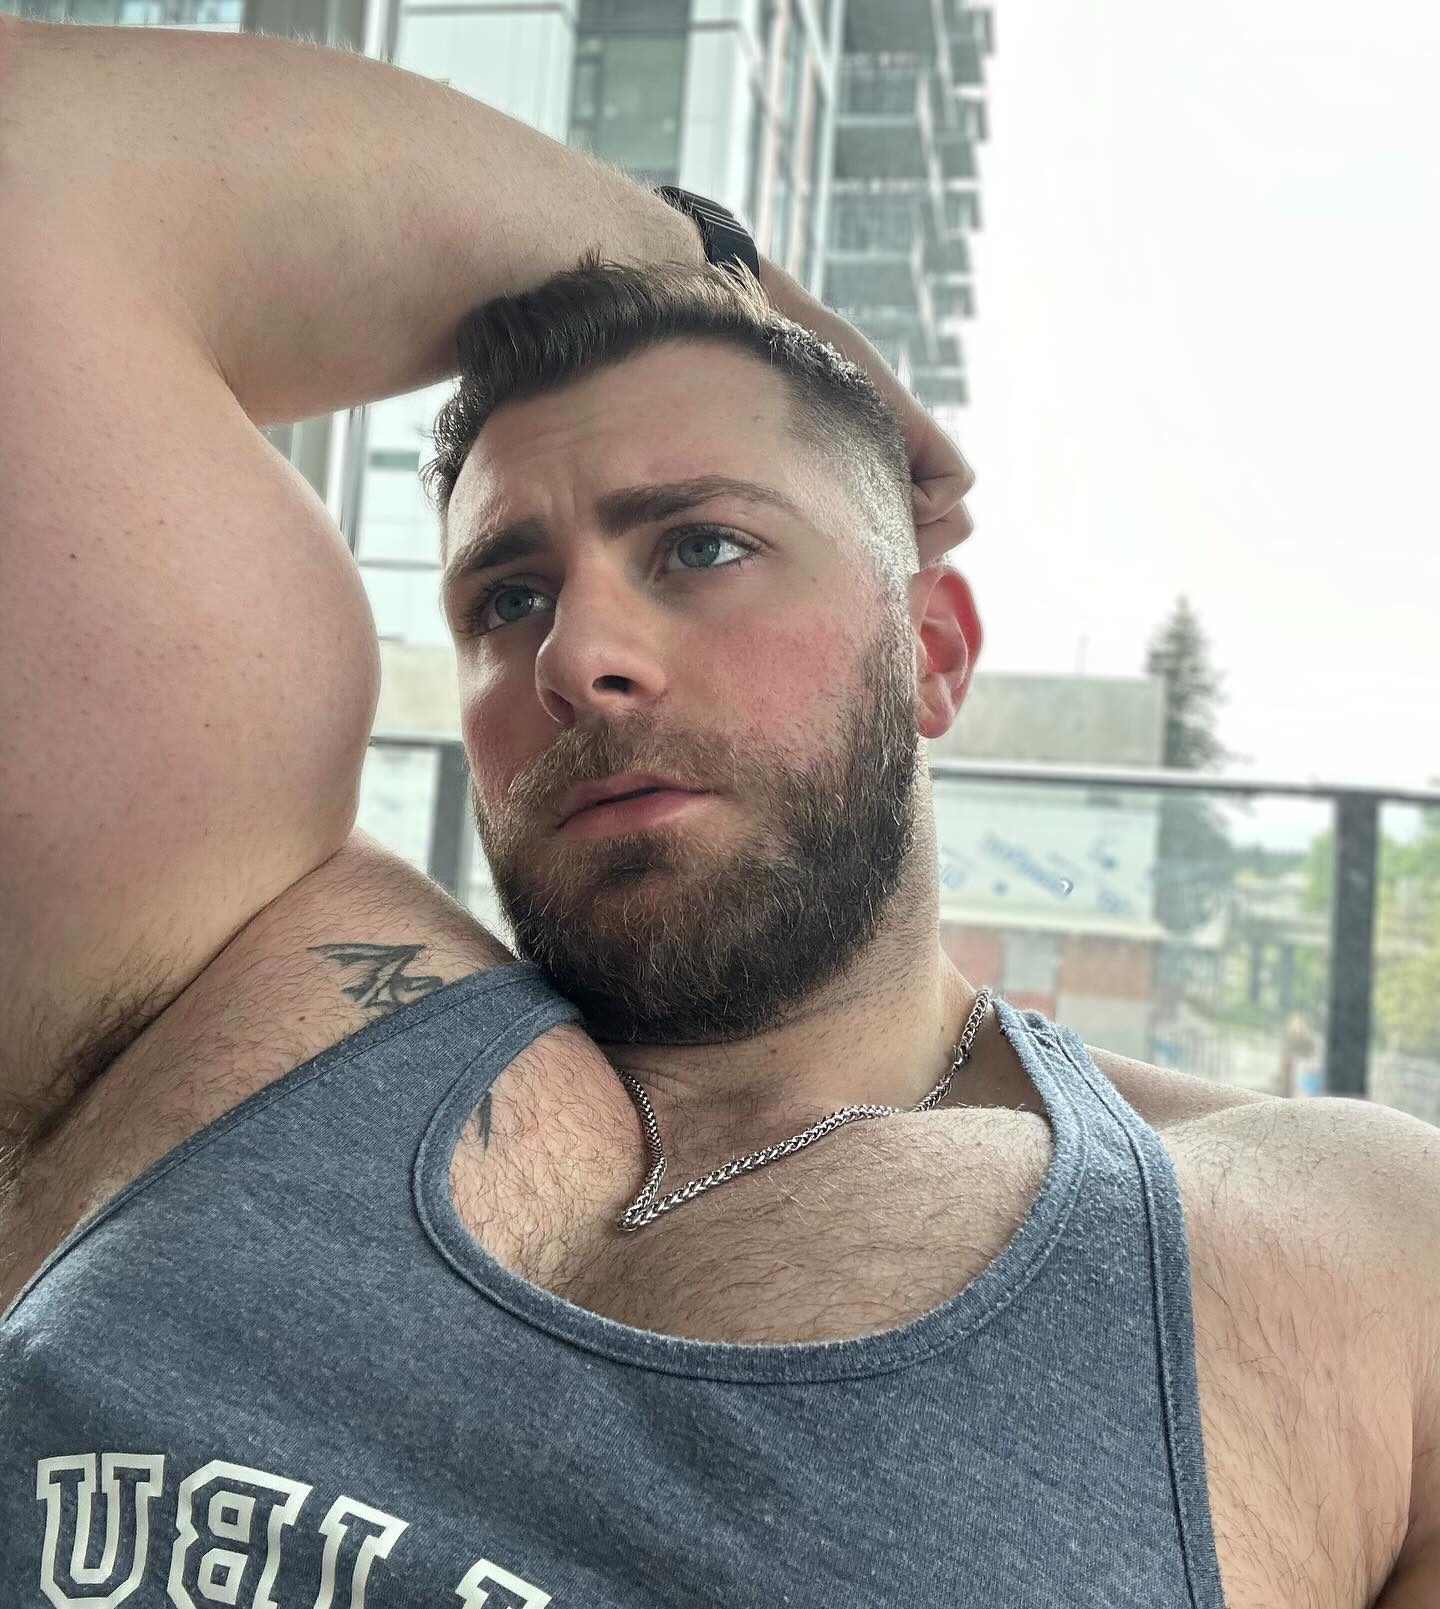 Saturdays are for (thirst trapping) the boys